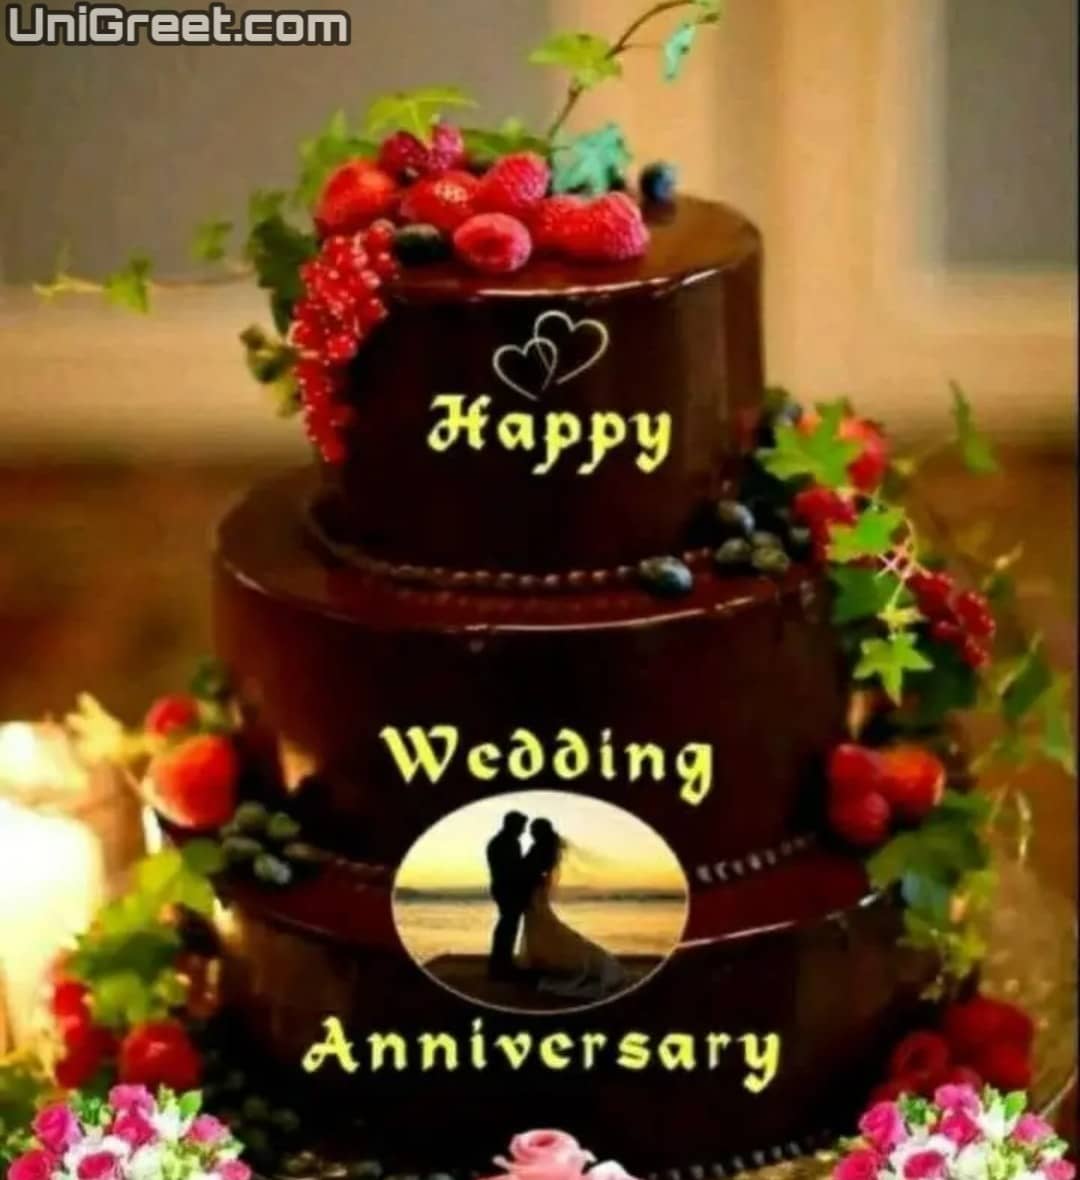 Top 999+ marriage anniversary cake images for whatsapp – Amazing Collection marriage anniversary cake images for whatsapp Full 4K